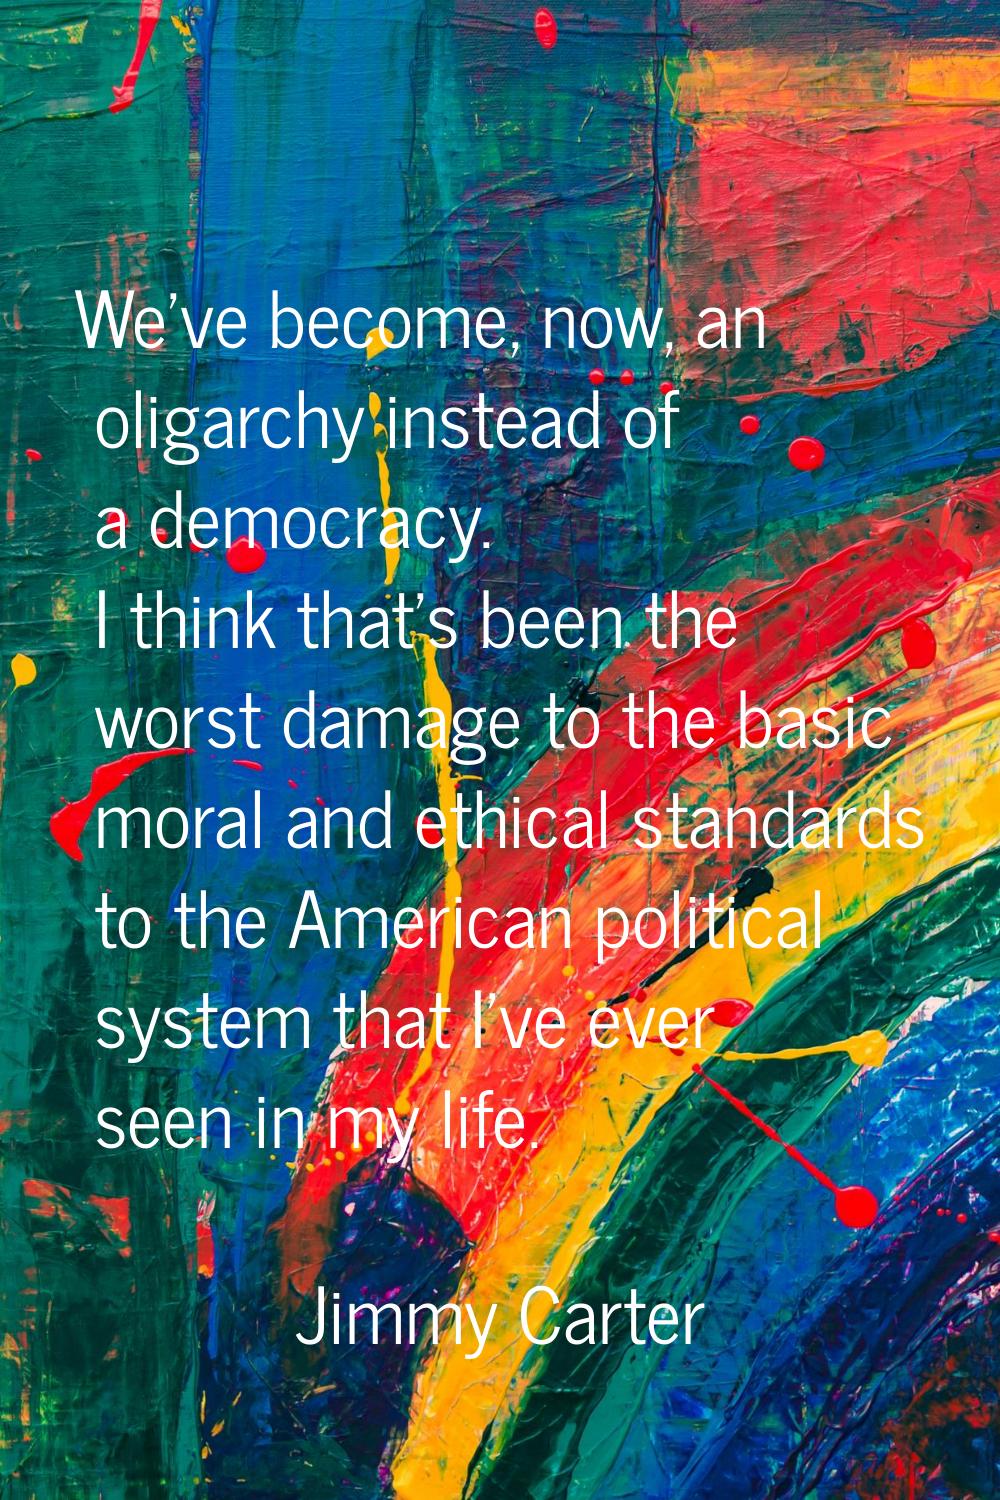 We've become, now, an oligarchy instead of a democracy. I think that's been the worst damage to the